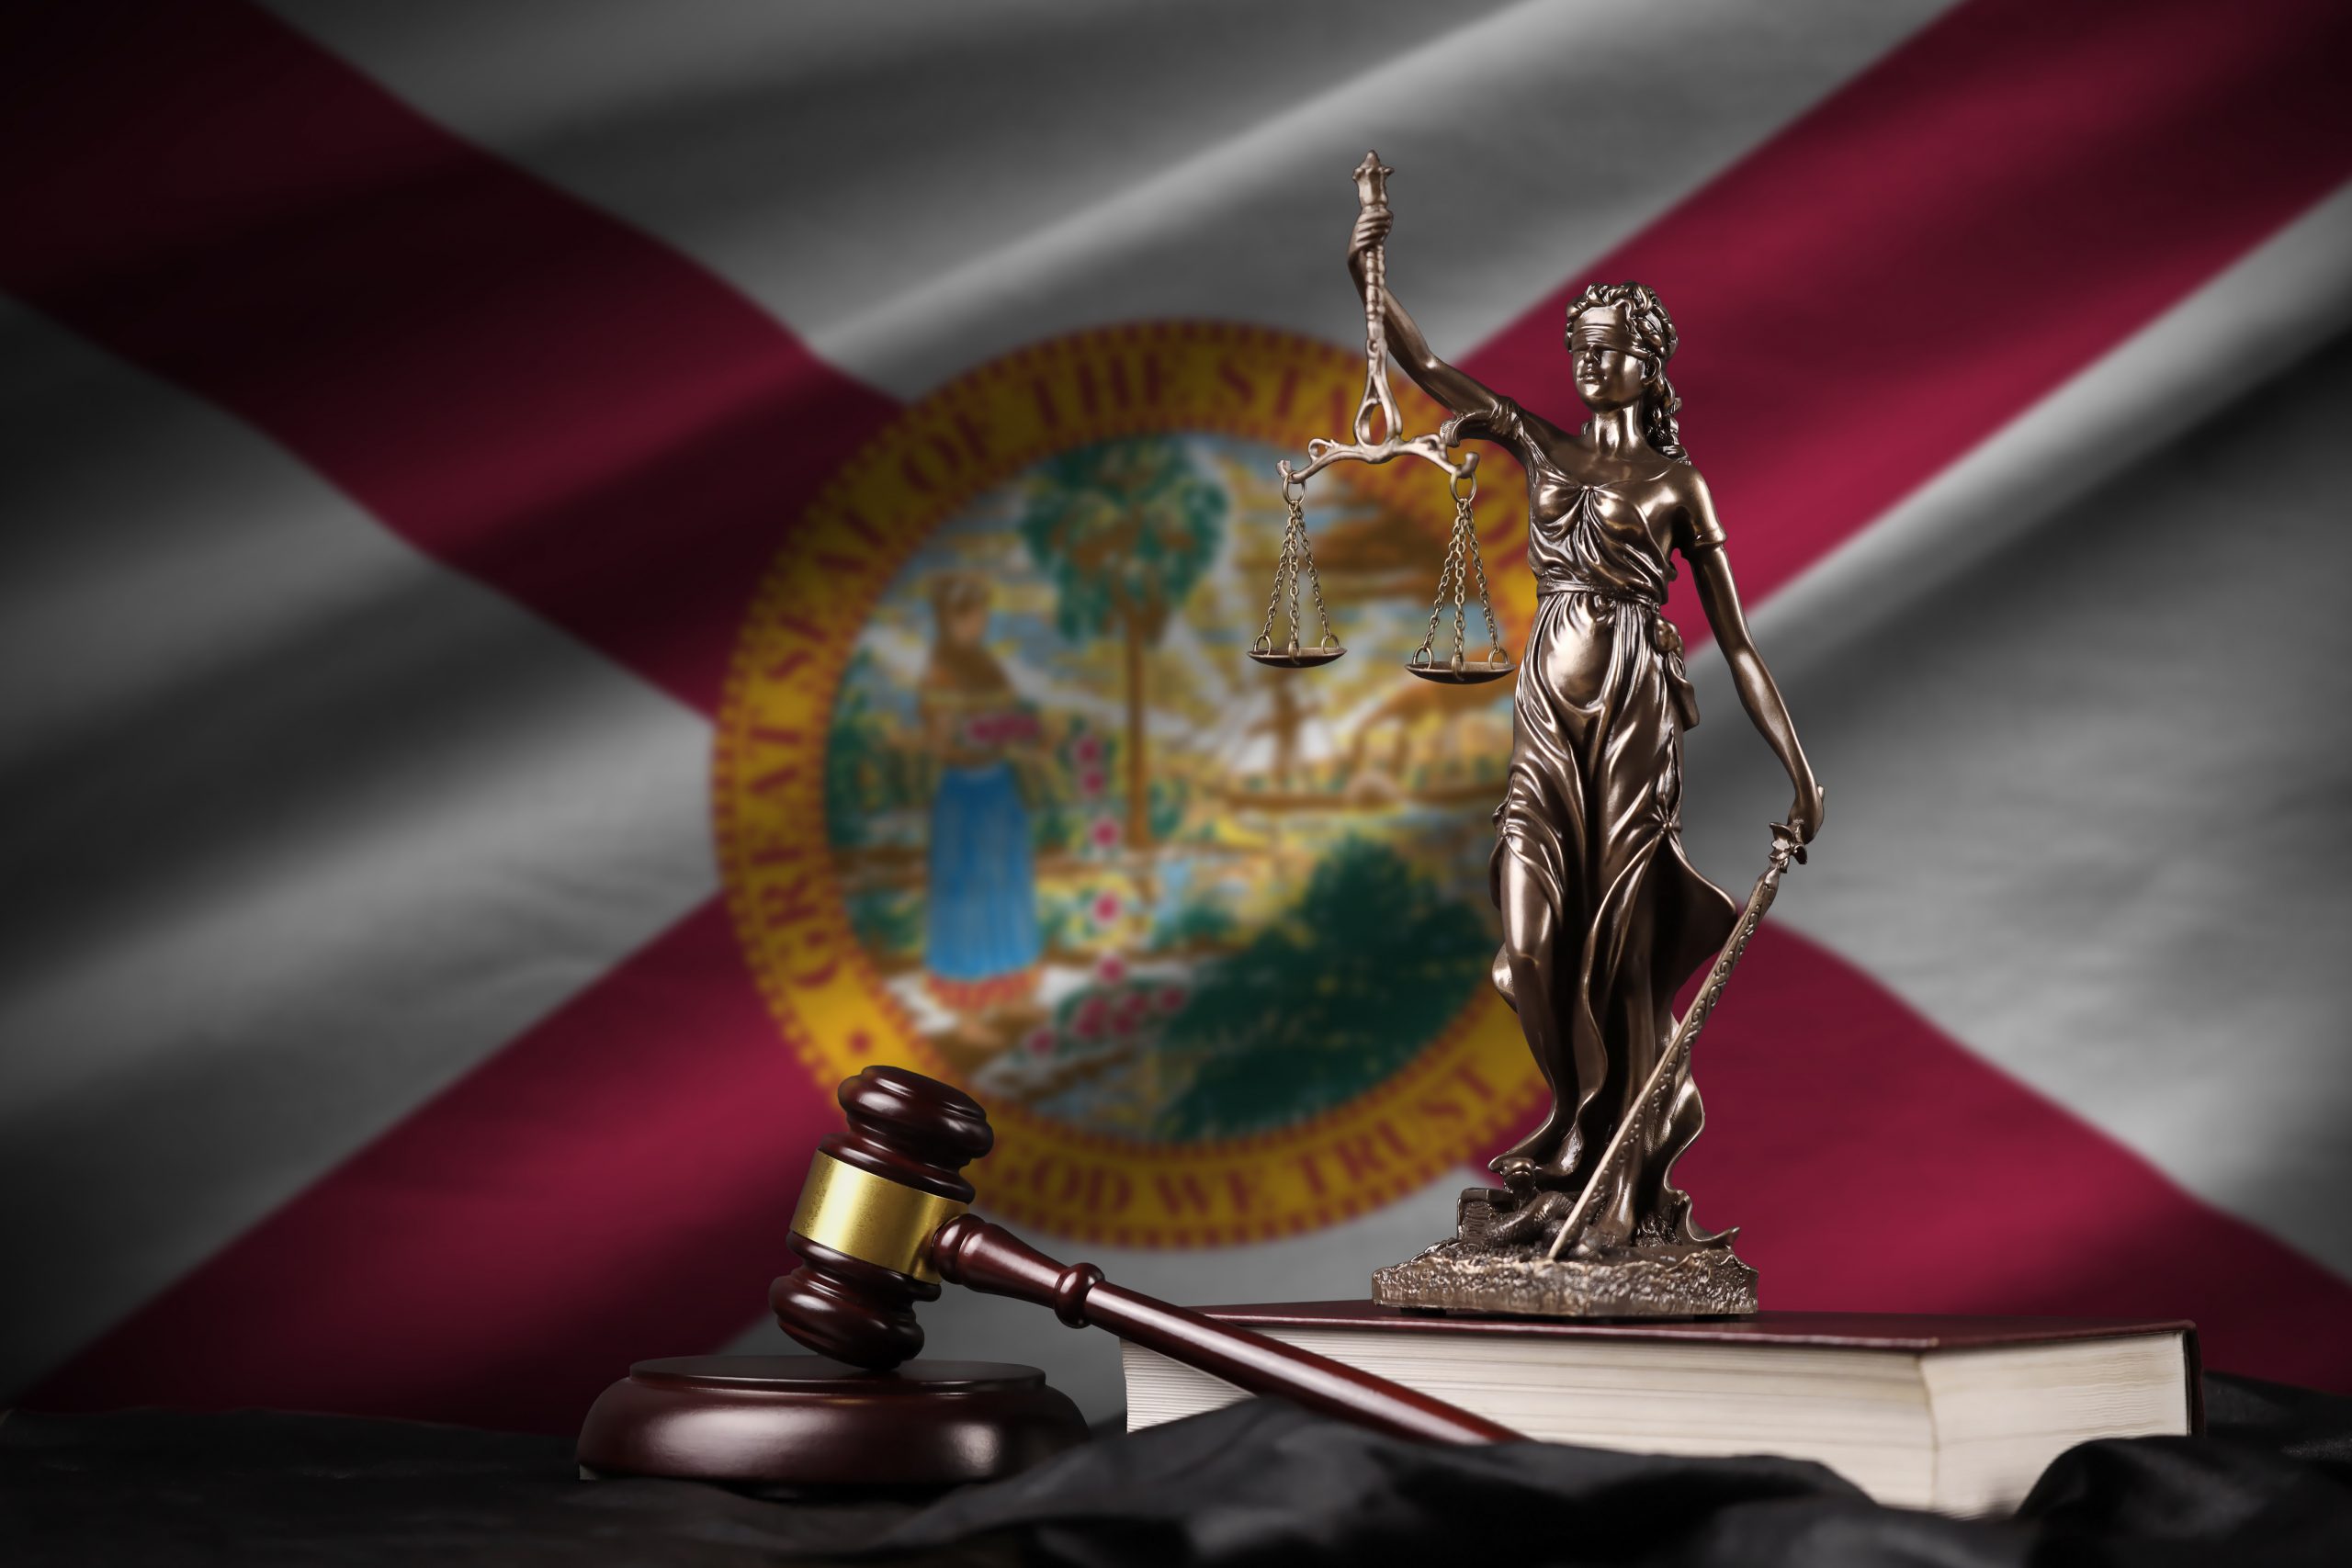 A bronze statue of Lady Justice holding scales and a sword, standing on a book beside a wooden gavel, set against a blurred backdrop of the Florida legal system flag.